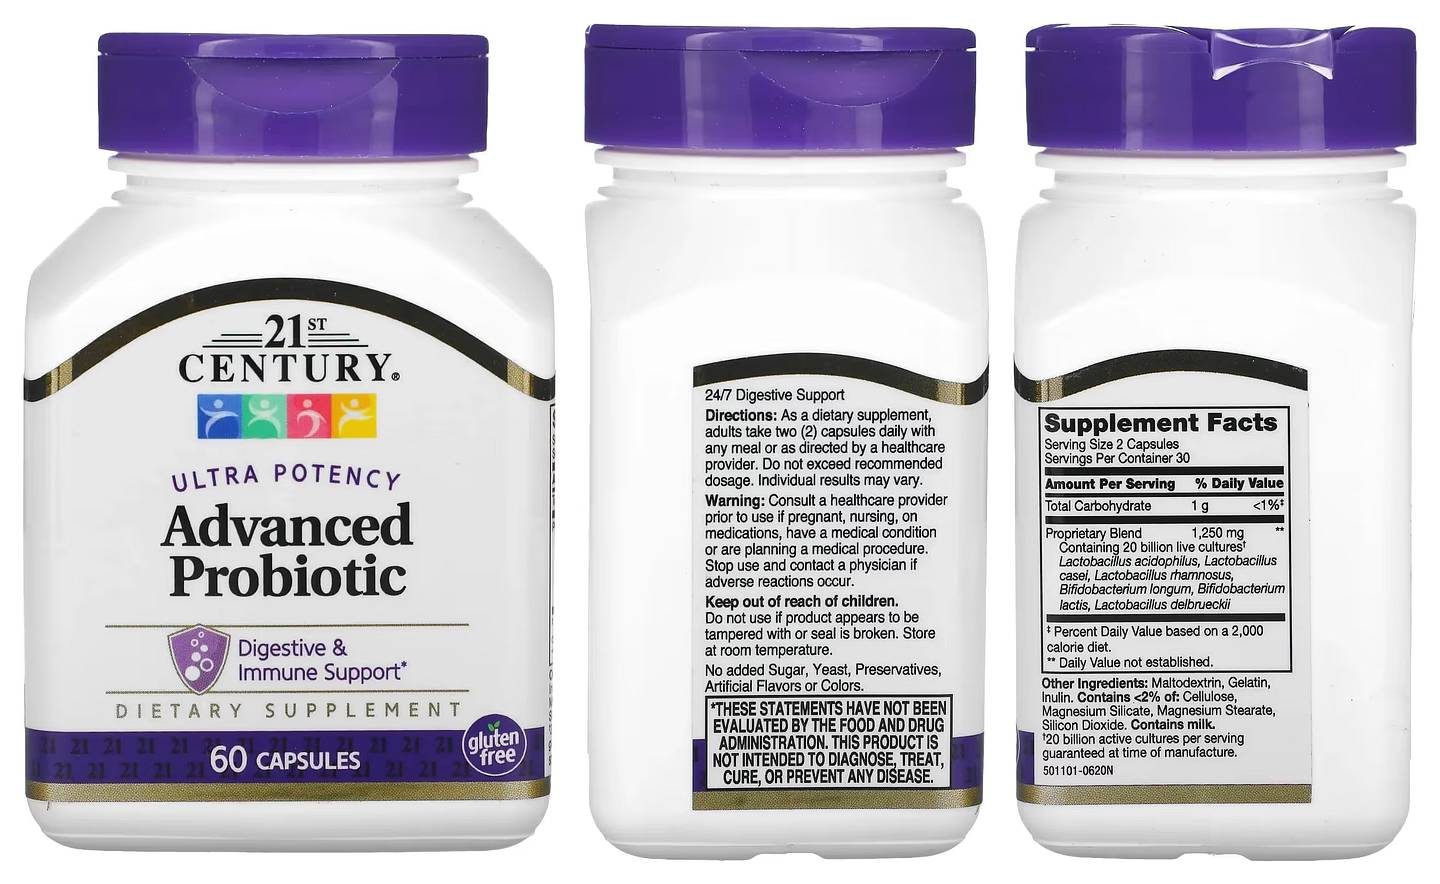 21st Century, Ultra Potency Advanced Probiotic packaging